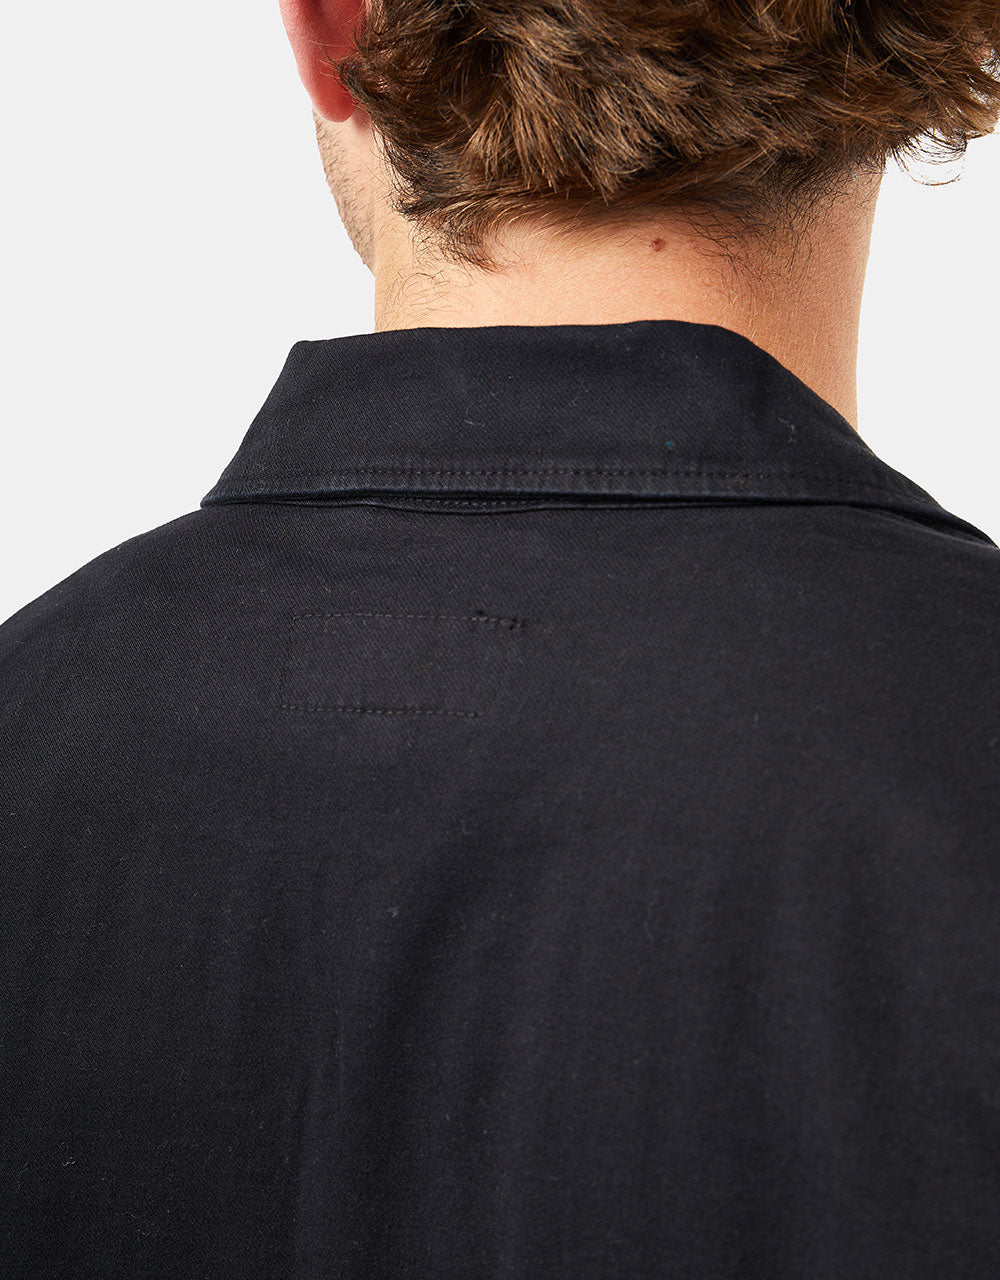 Route One Military Shirt - Black